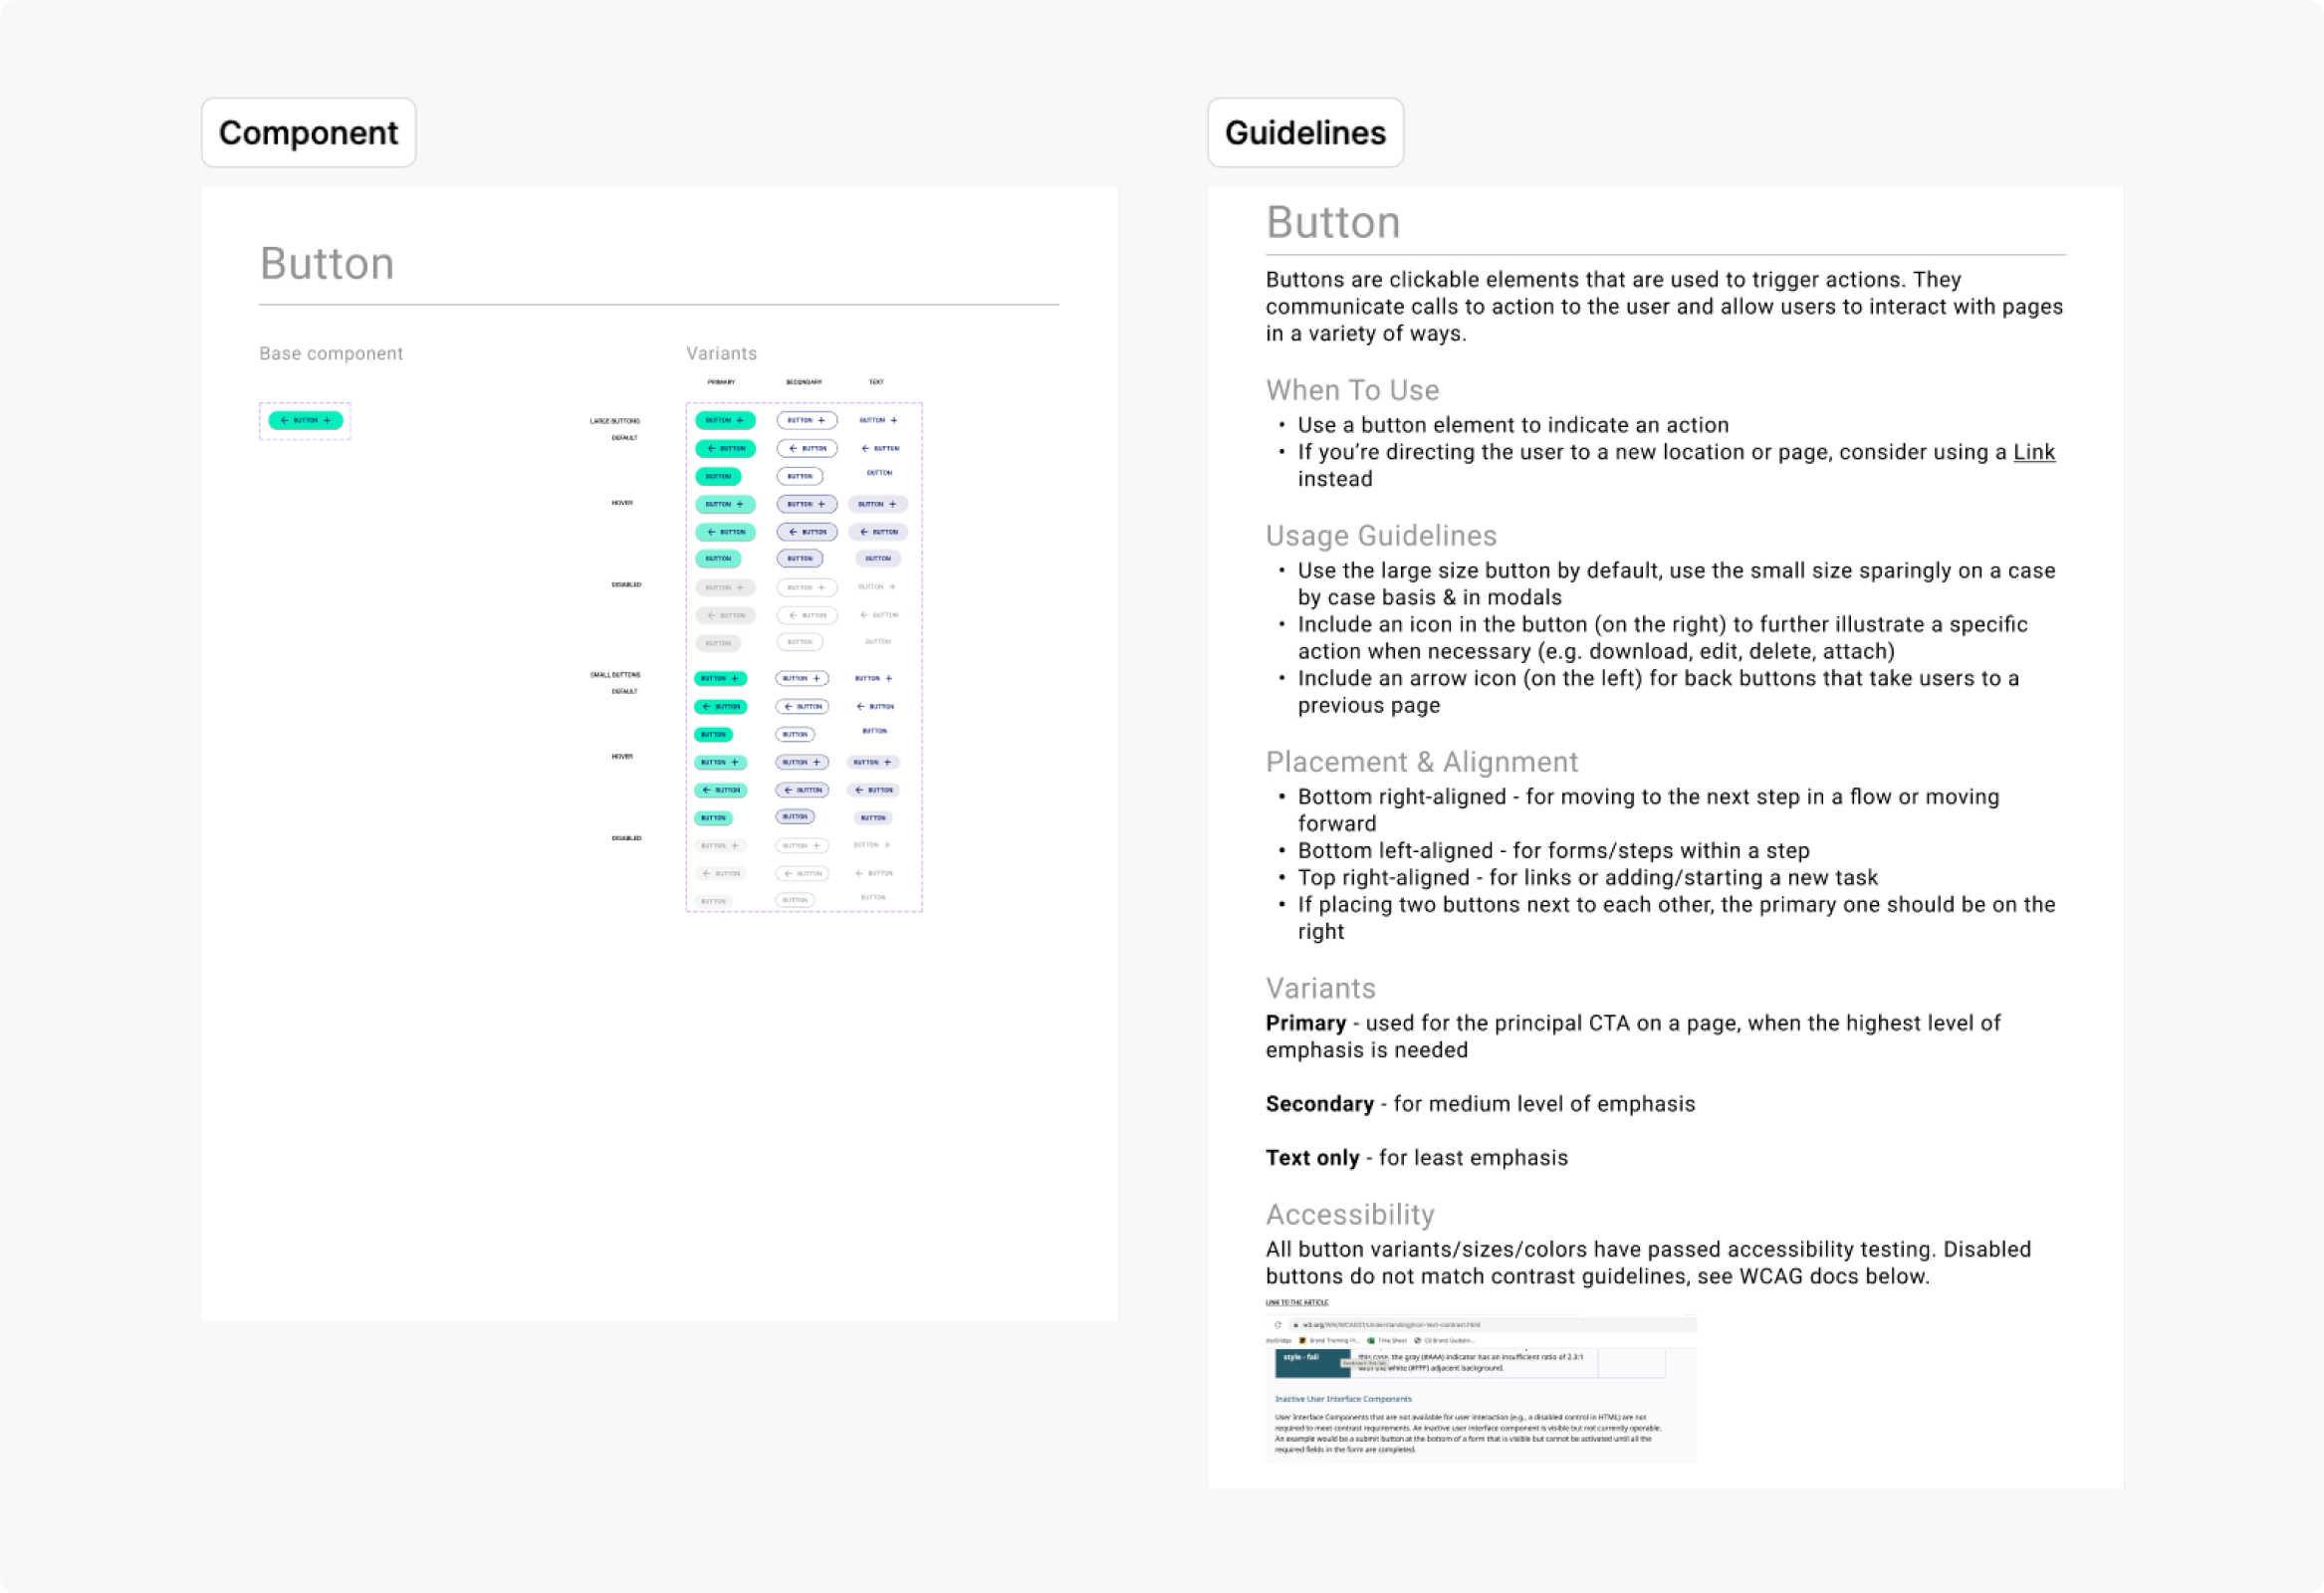 Screenshot of the Button page in the design system in Figma showing the built component + variants and the written usage guidelines.